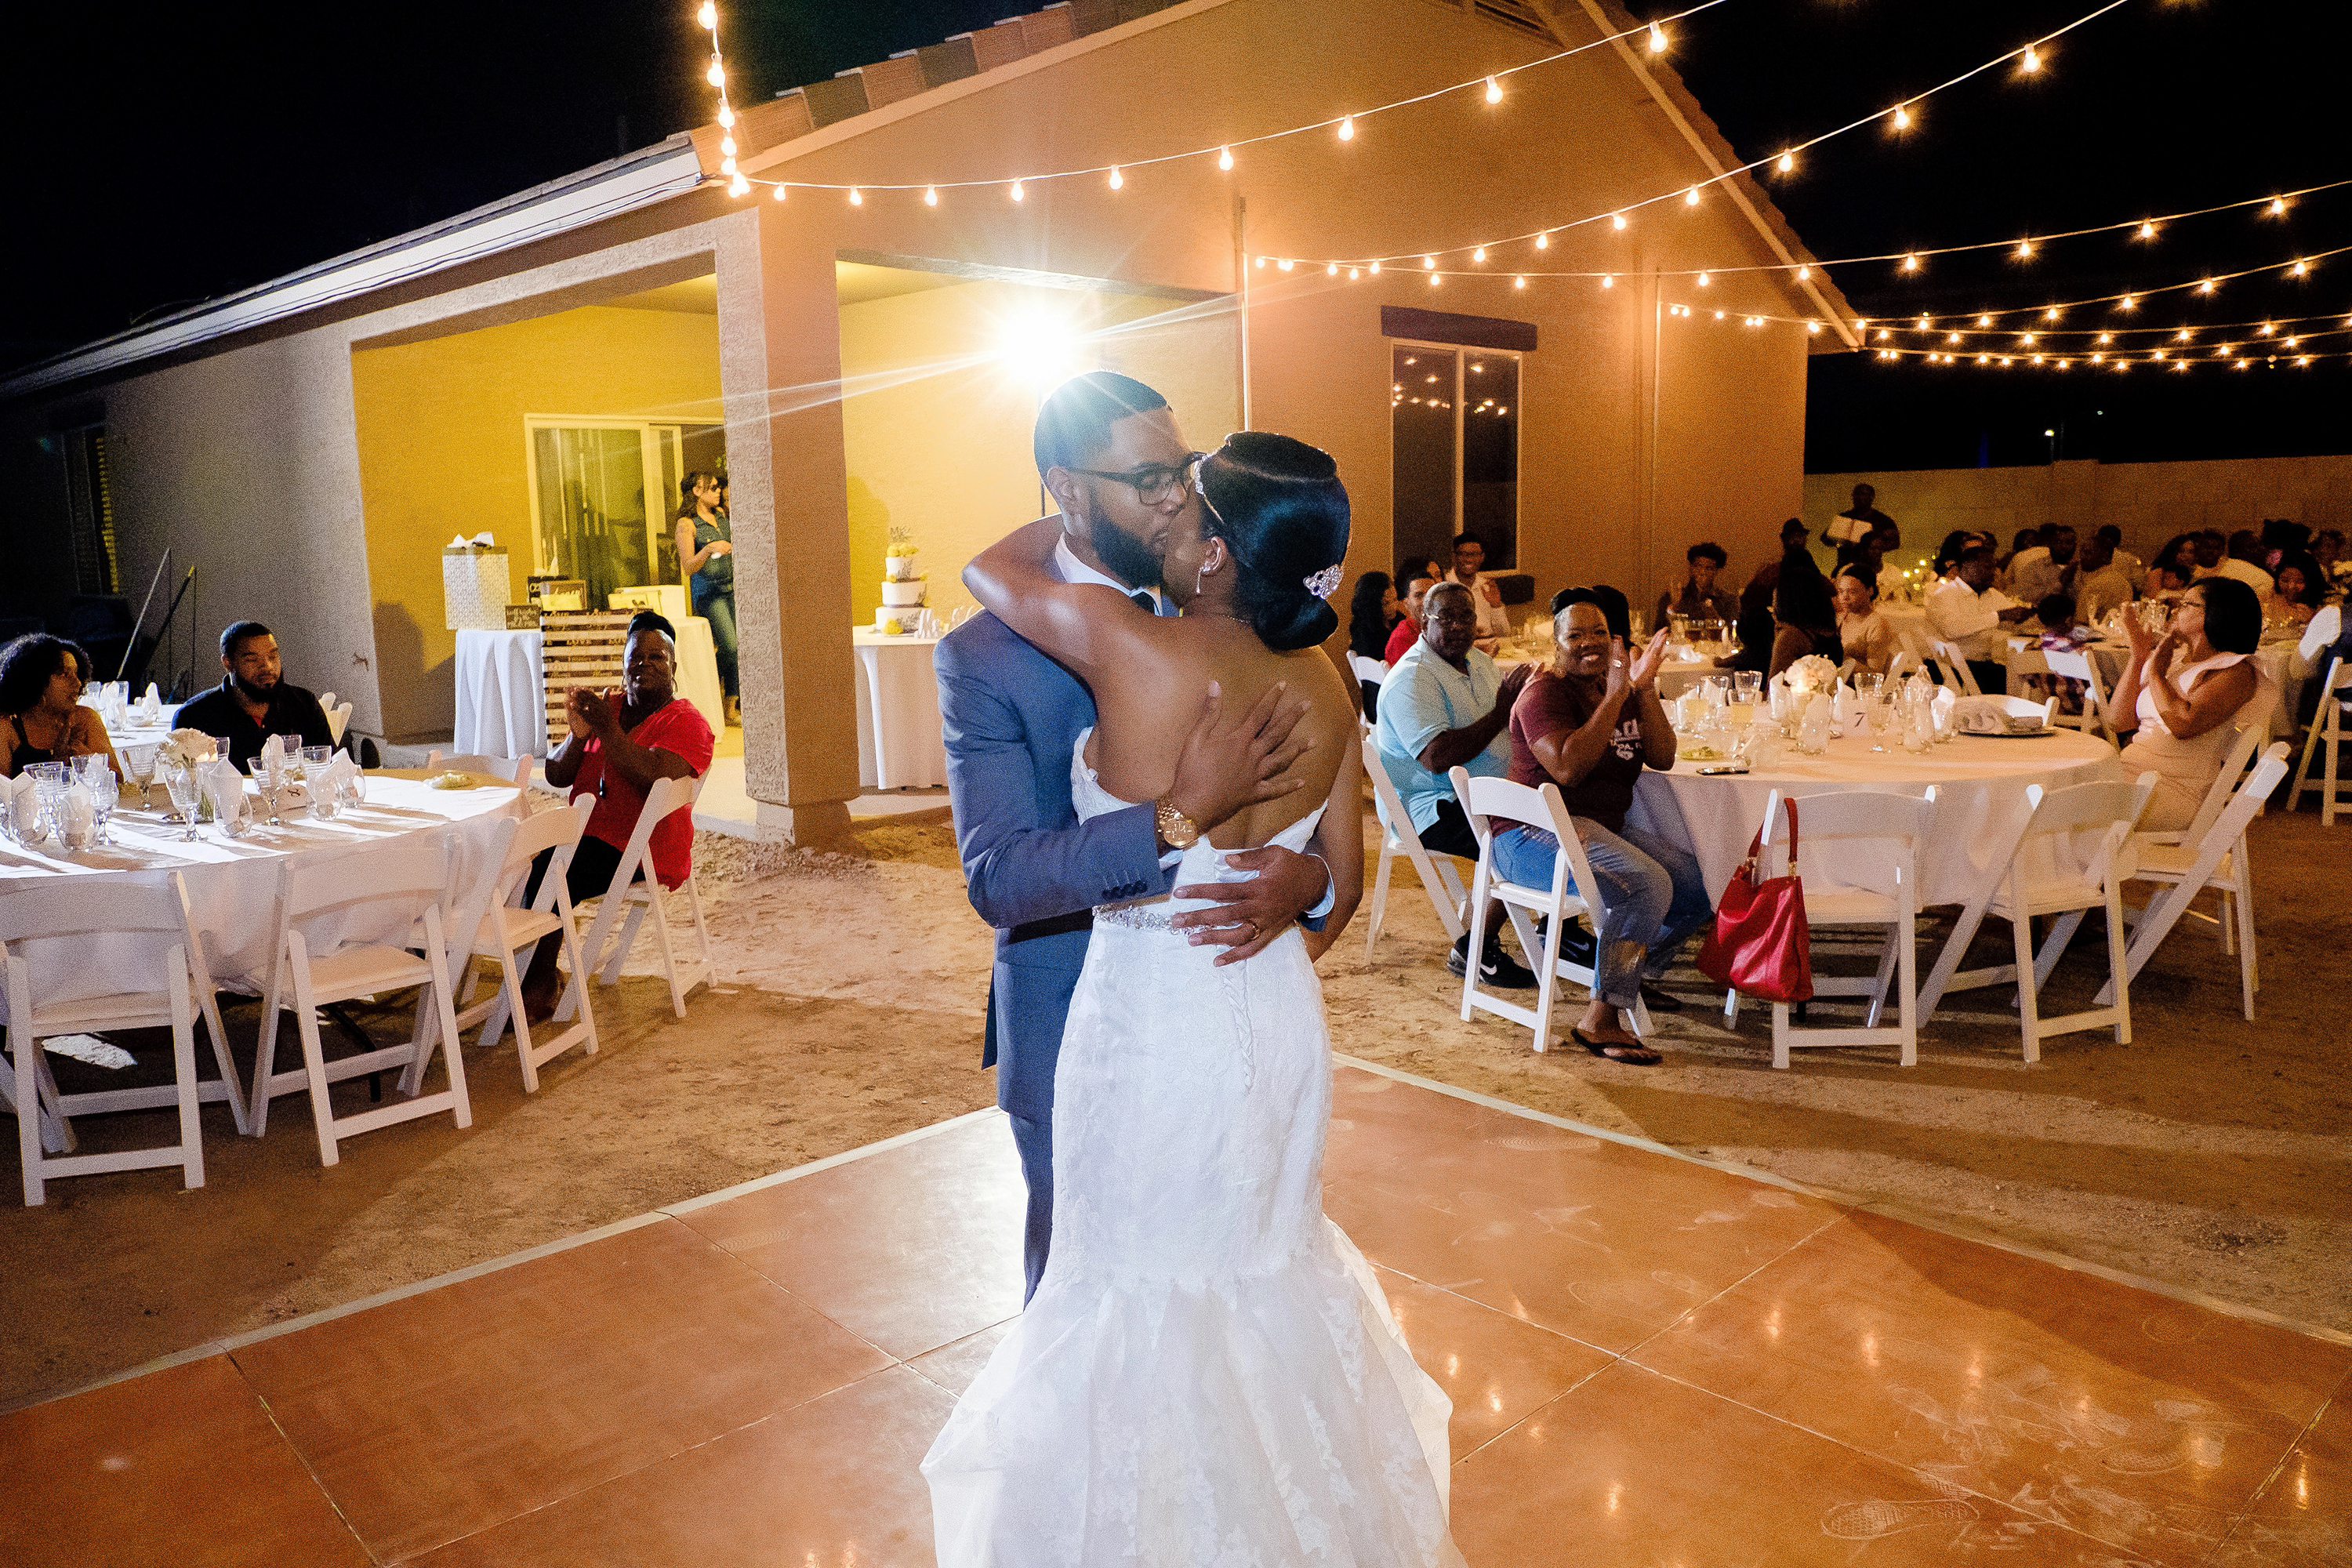 Bride and groom's first dance at their backyard wedding reception